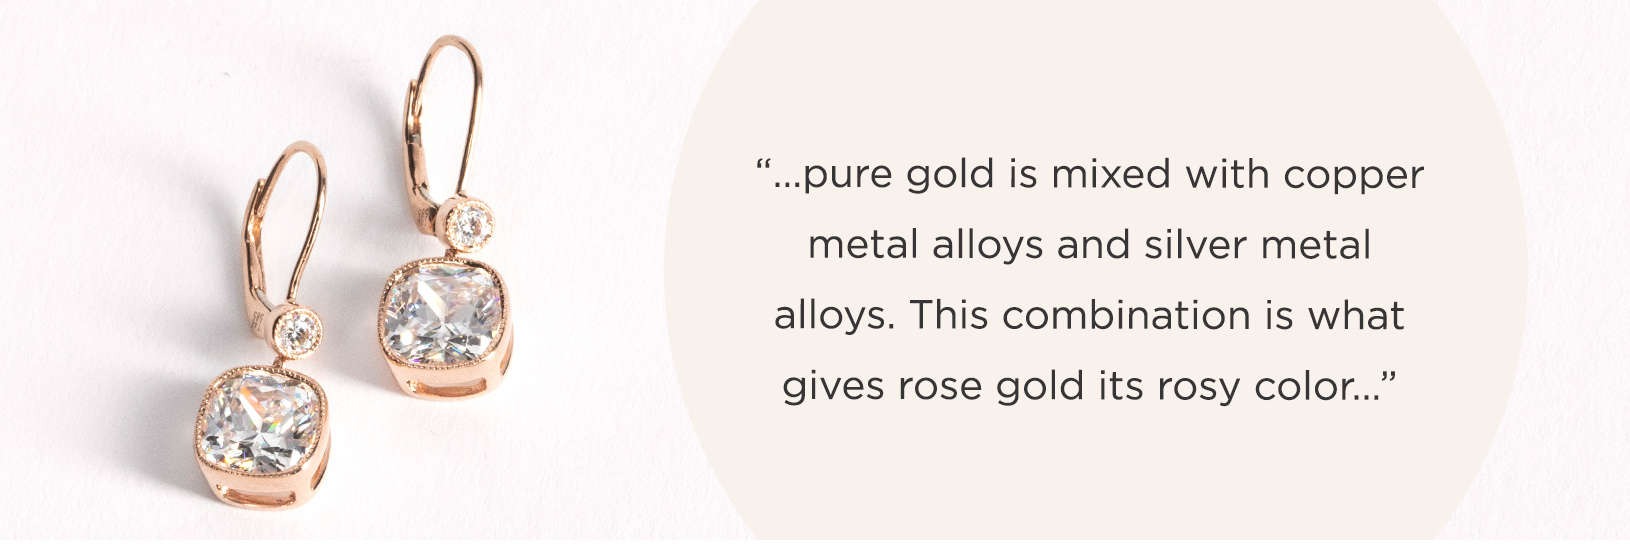 A mix of copper and silver alloys give rose gold its pinkish hue